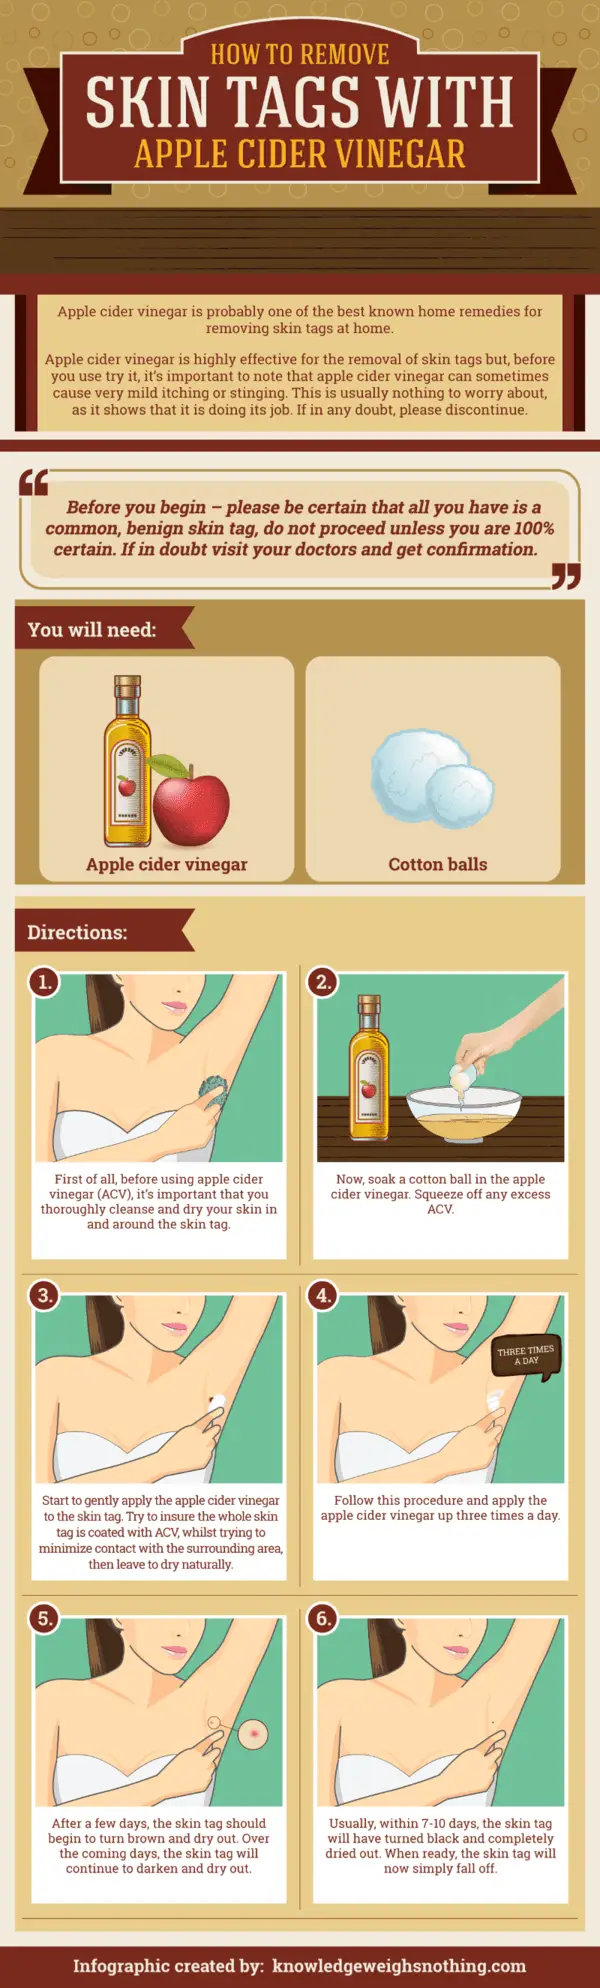 How to remove skin tags infographic